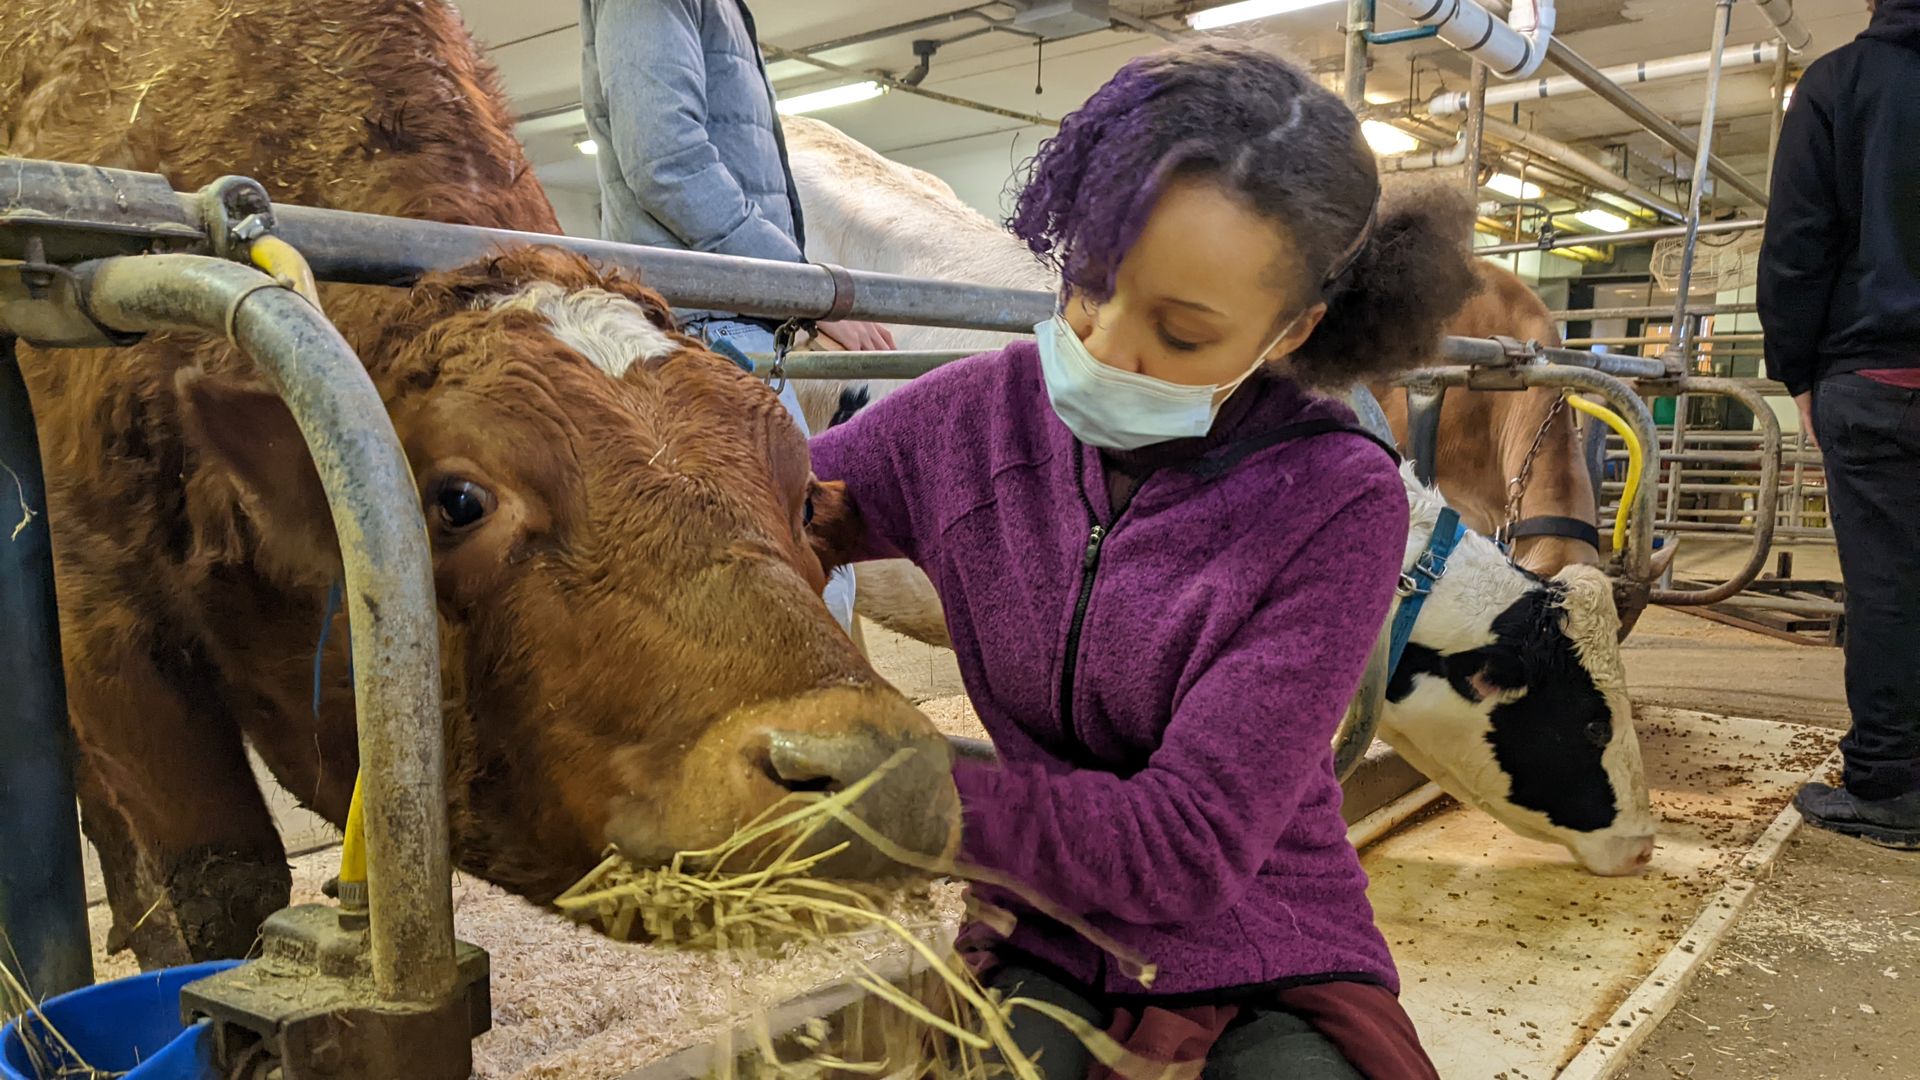 Tamia Grimes, a 17-year-old, stands beside a cow